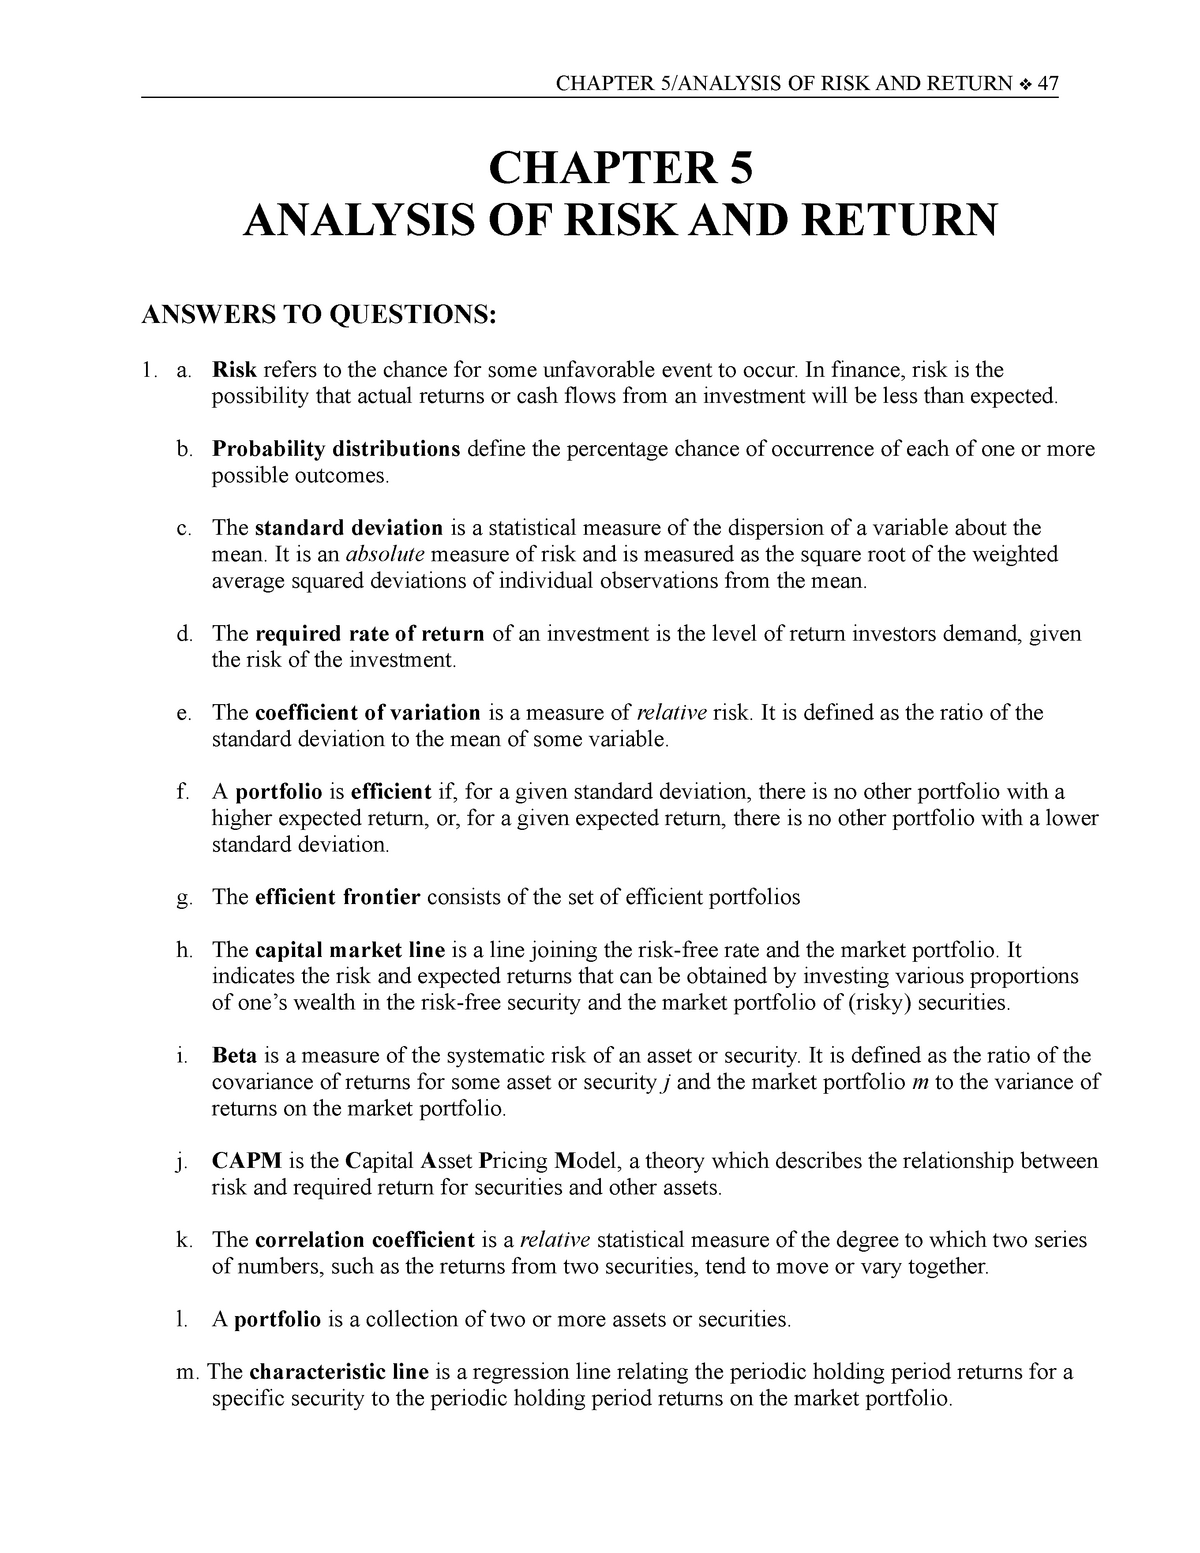 research paper on risk and return analysis